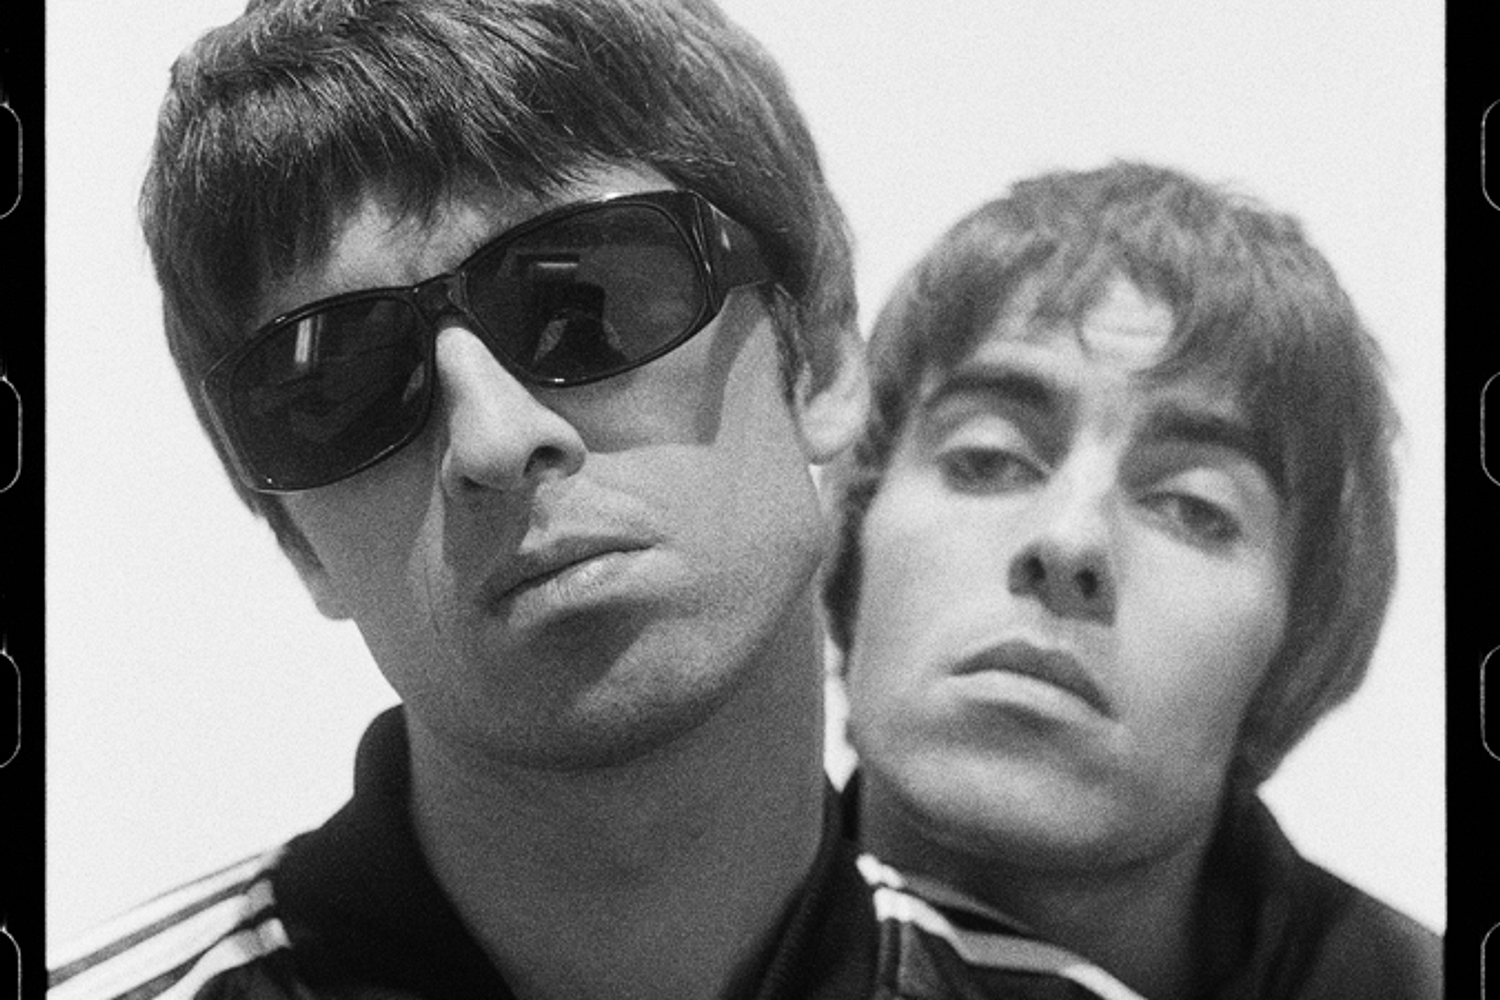 Oasis announce 'Definitely Maybe' 30th anniversary album reissue